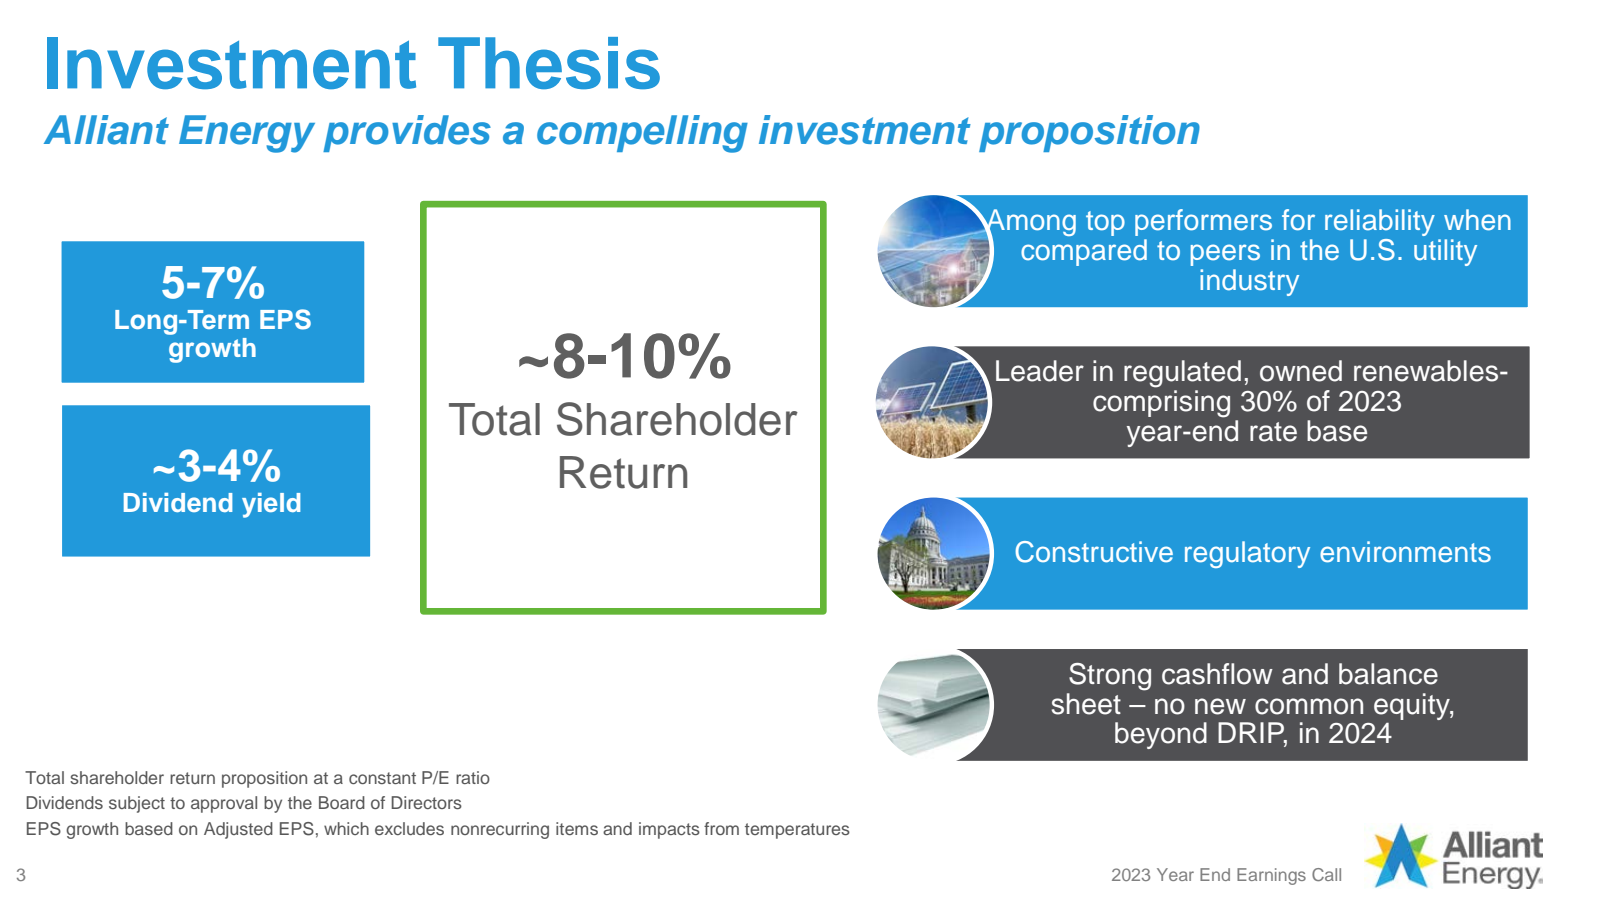 Investment Thesis 
A